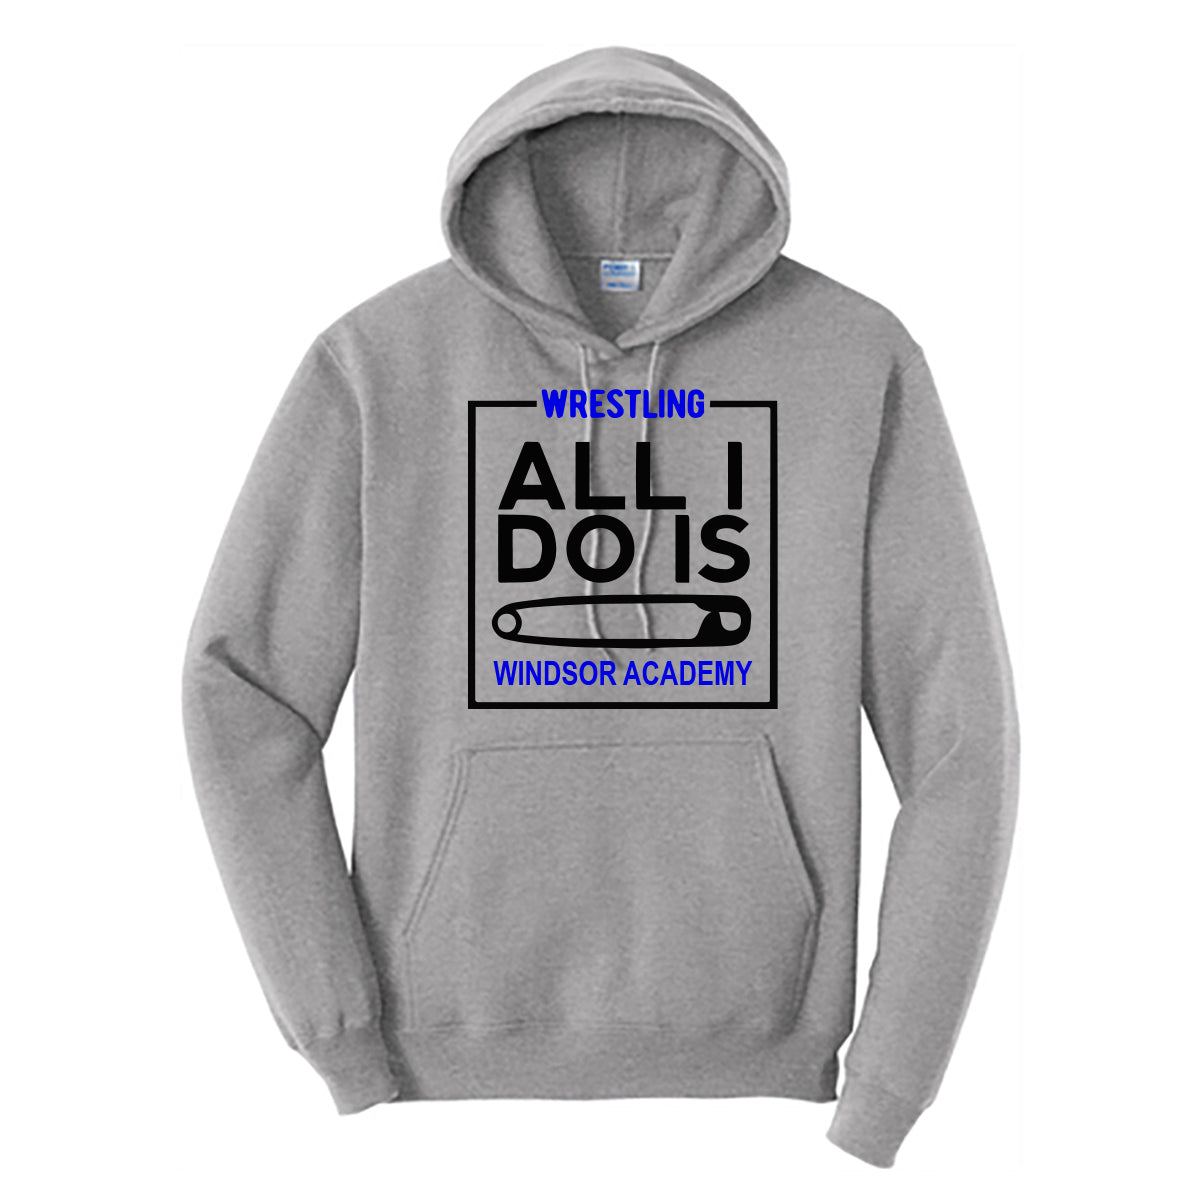 Windsor - Wrestling All I Do Is Pin - Athletic Heather (Tee/DriFit/Hoodie/Sweatshirt) - Southern Grace Creations